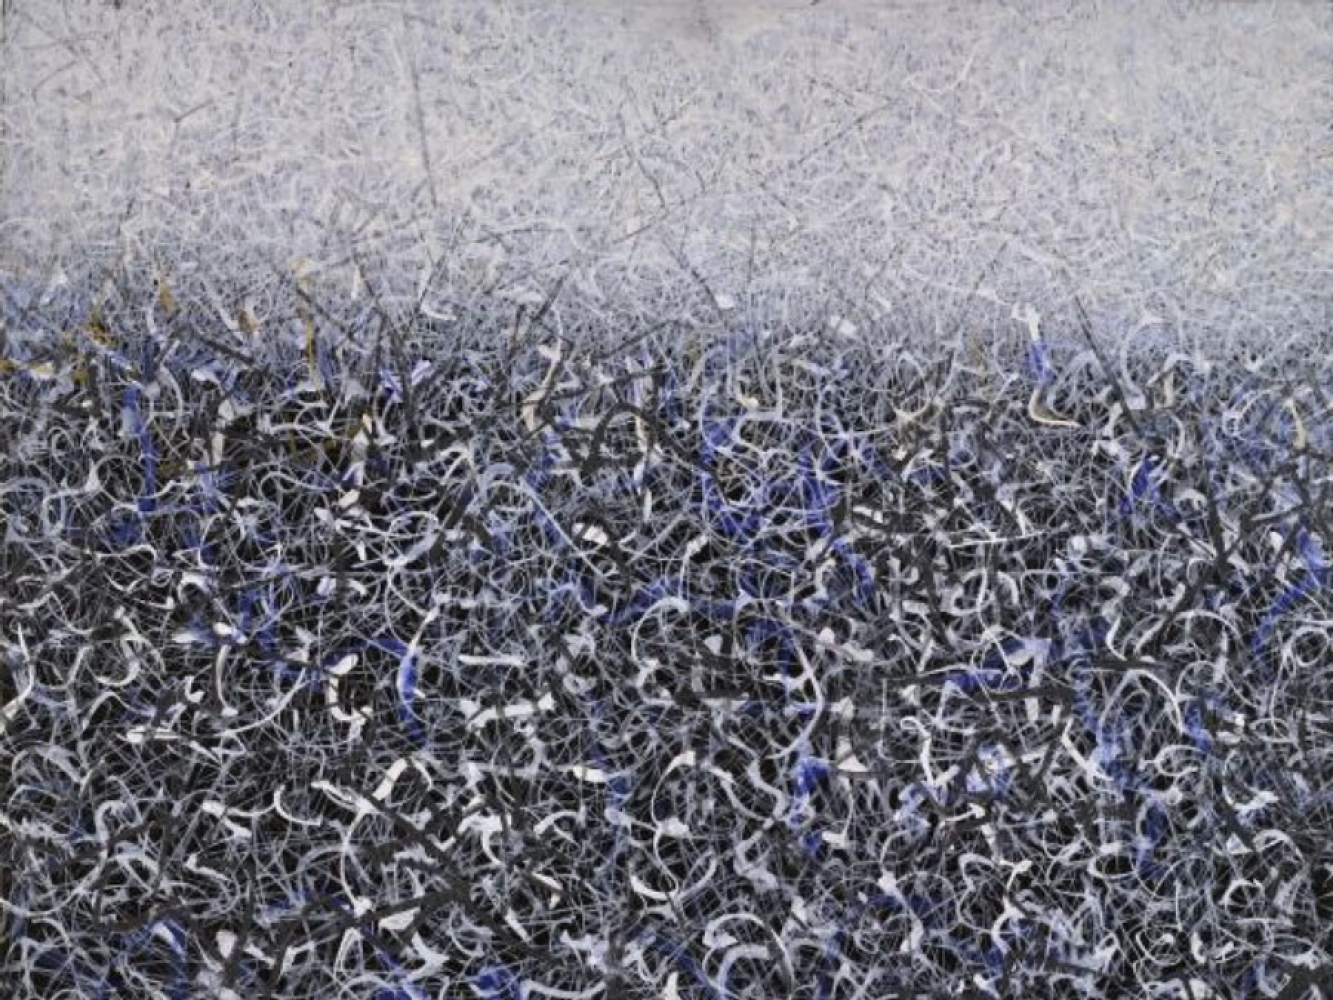 Wild Field, an artwork presented within the exhibition “Mark Tobey Luce filante”